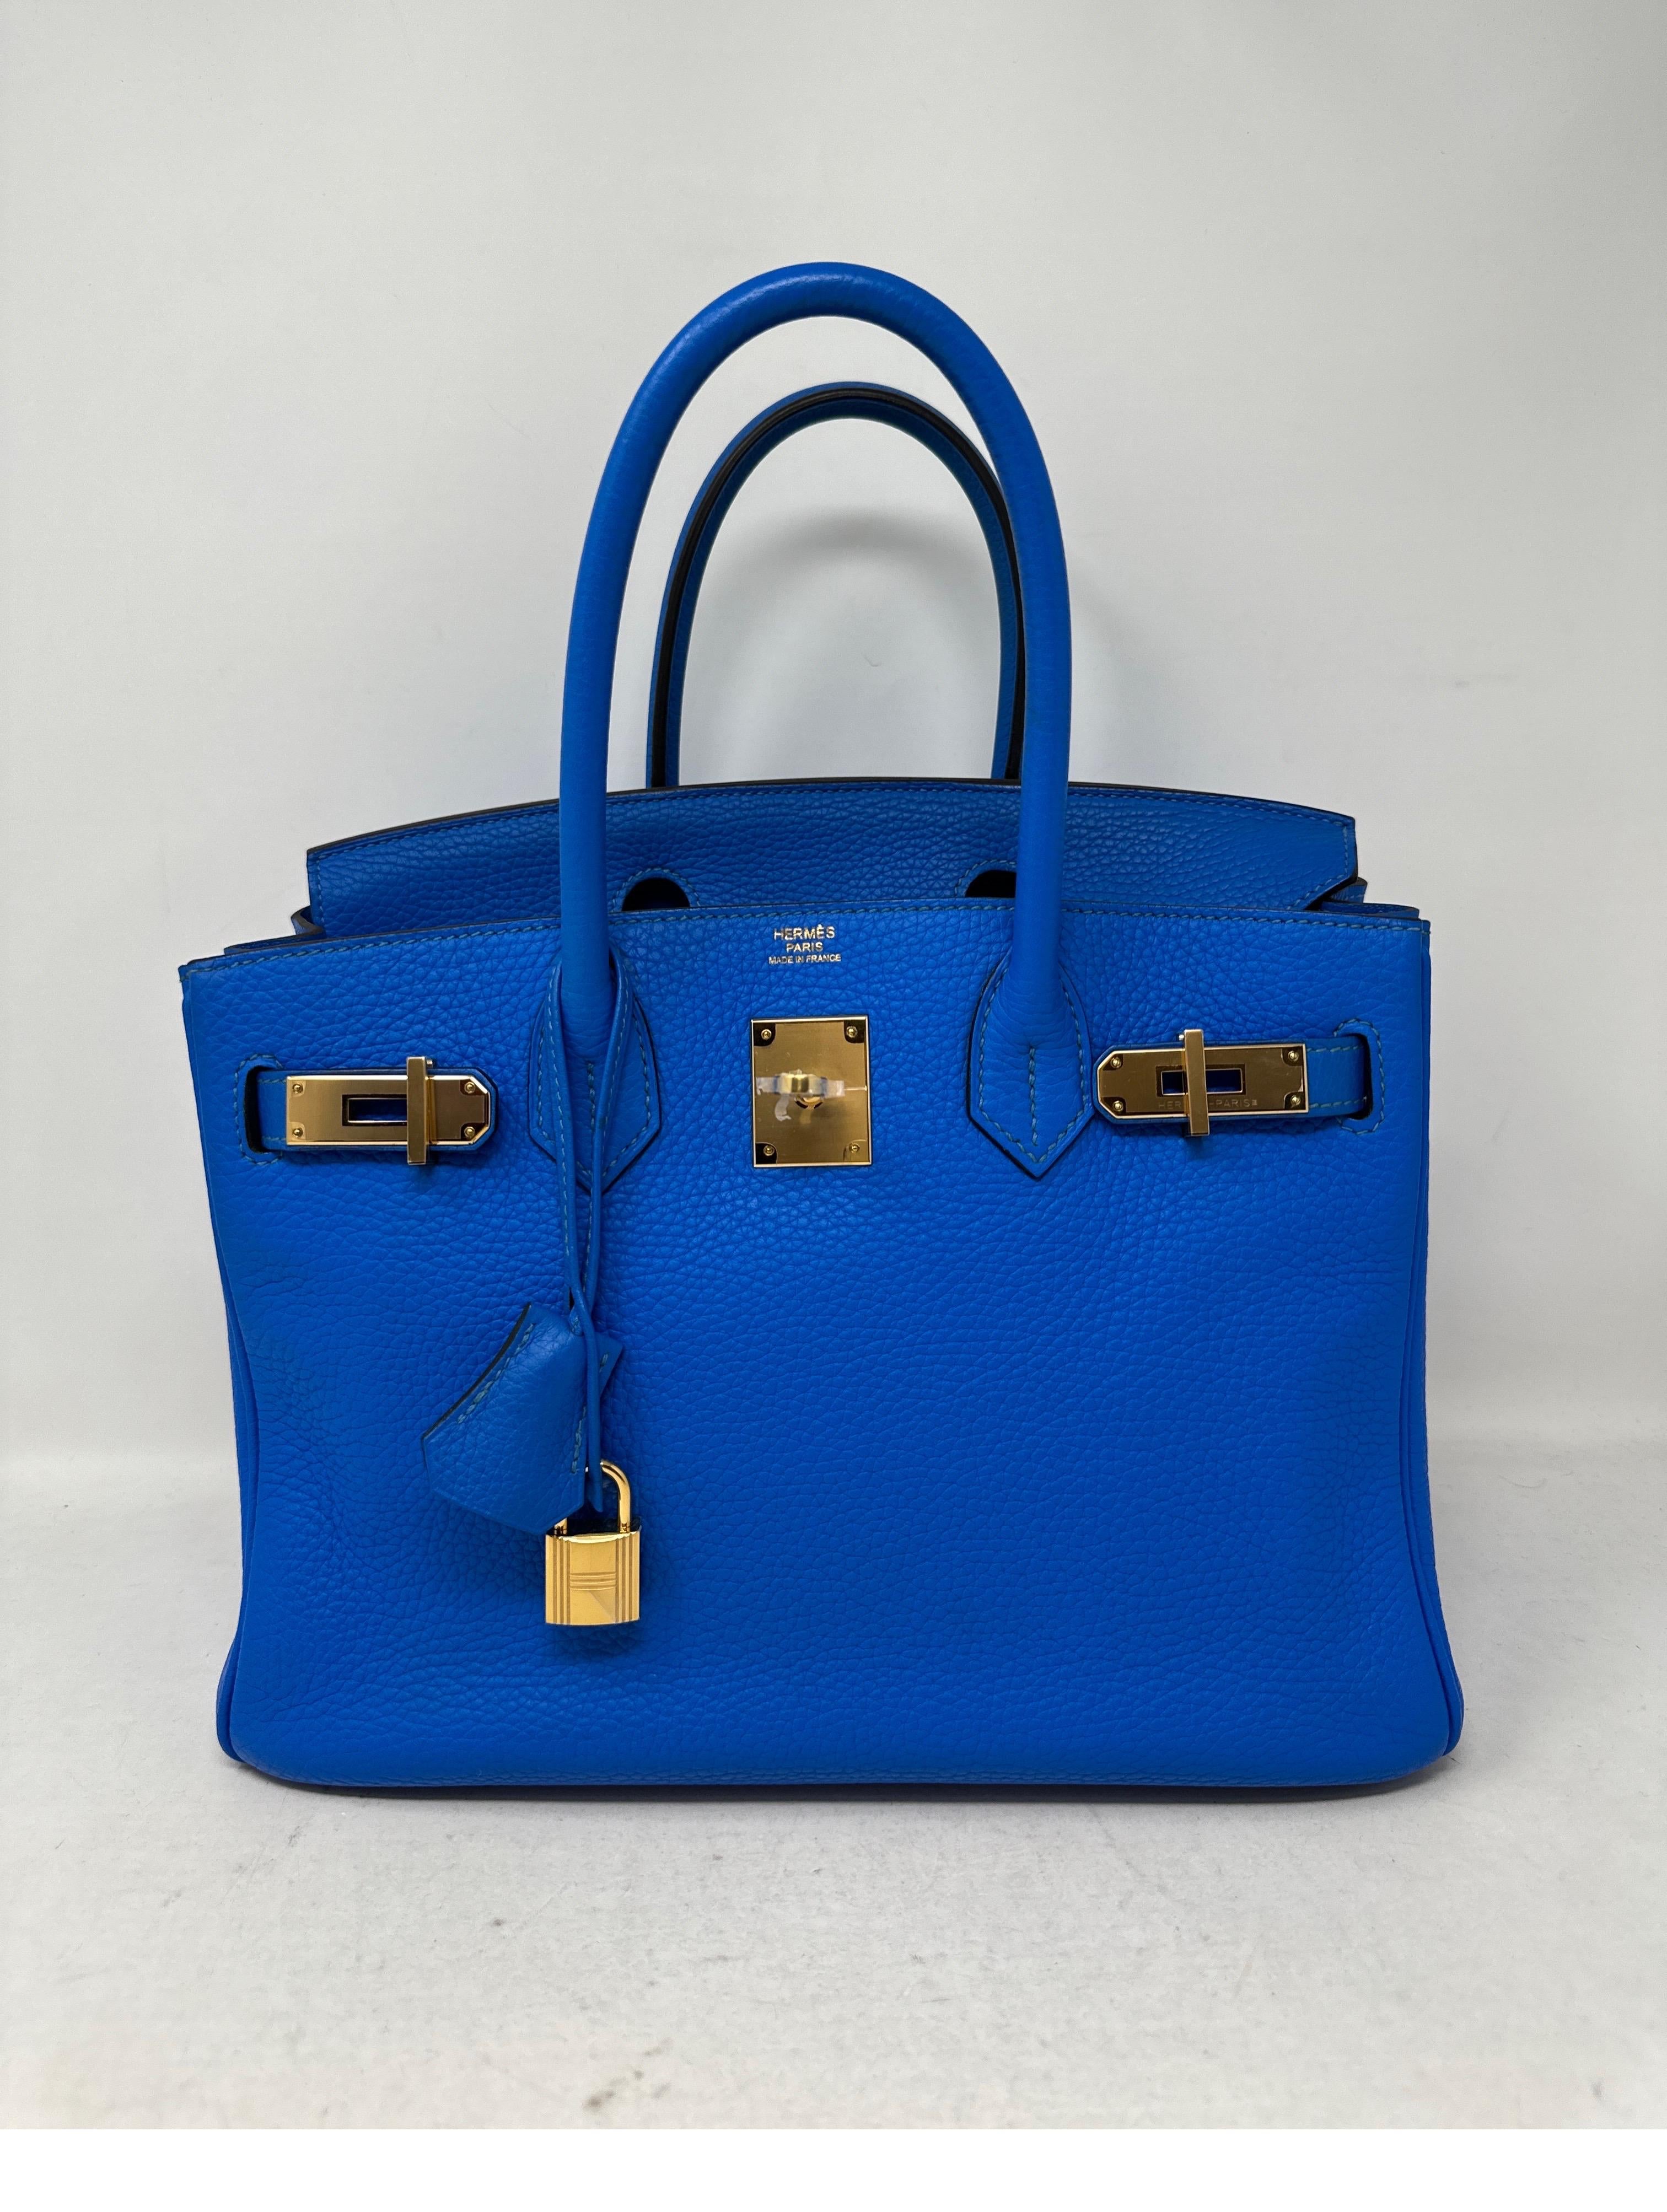 Hermes Birkin 30 Blue Hydra Birkin Bag. Clemence leather. Gold hardware. Stamp P. Excellent condition. Vibrant blue color. Most wanted size. Plastic is still on the hardware. Interior clean. Includes clochette, lcok, keys, and dust bag. Guaranteed